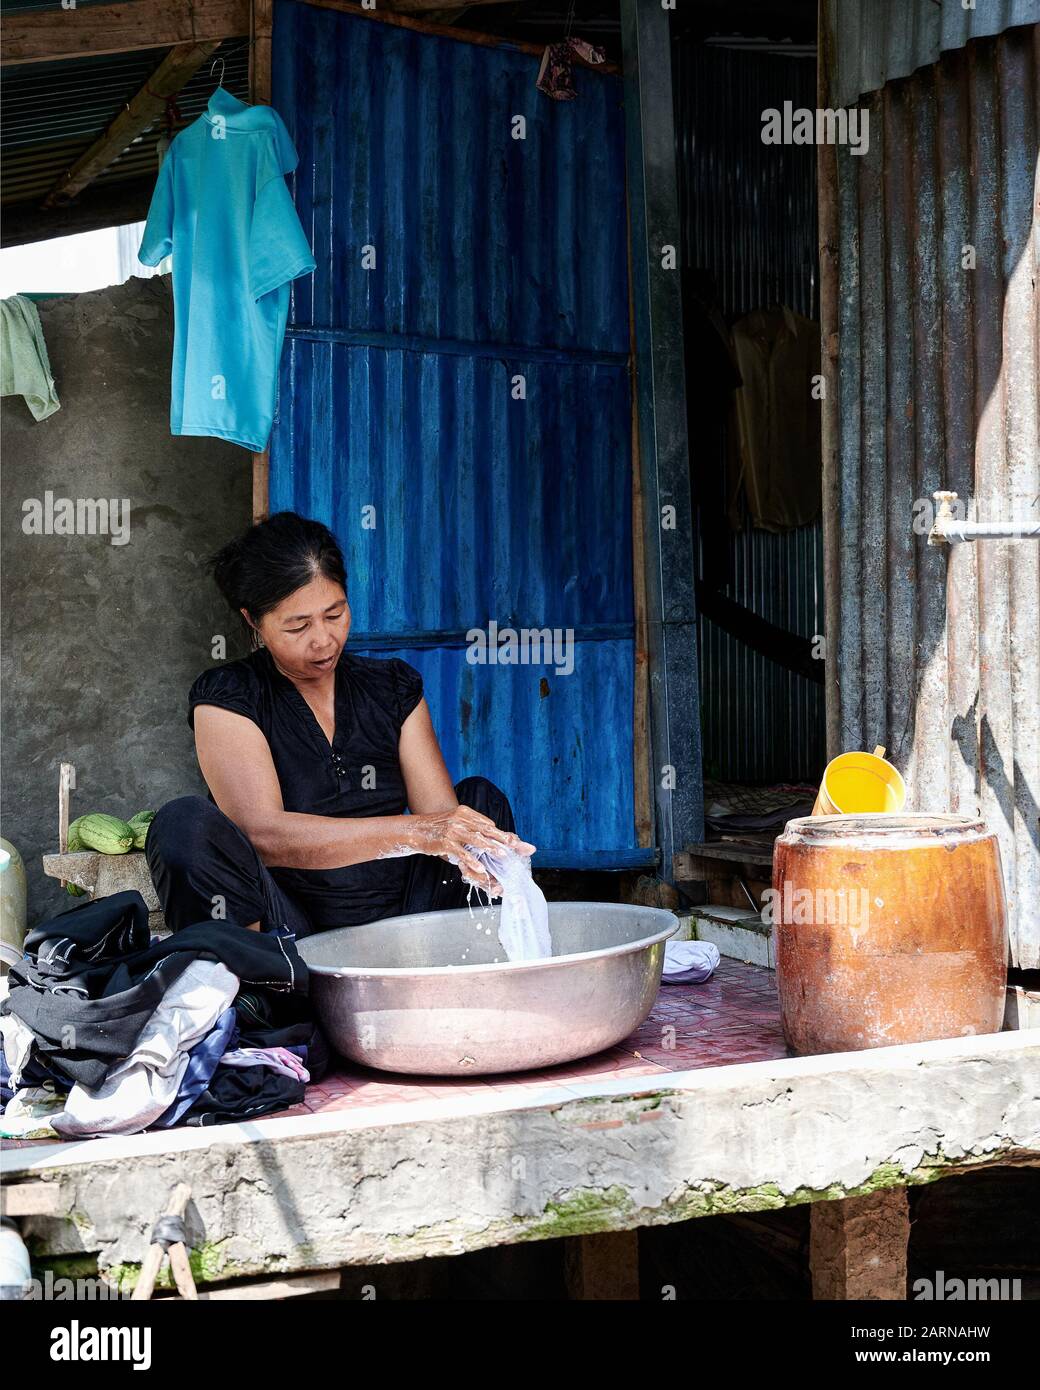 https://c8.alamy.com/comp/2ARNAHW/vietnams-rural-areas-have-no-washing-machines-women-in-these-families-spend-hours-a-day-hand-washing-their-clothes-2ARNAHW.jpg